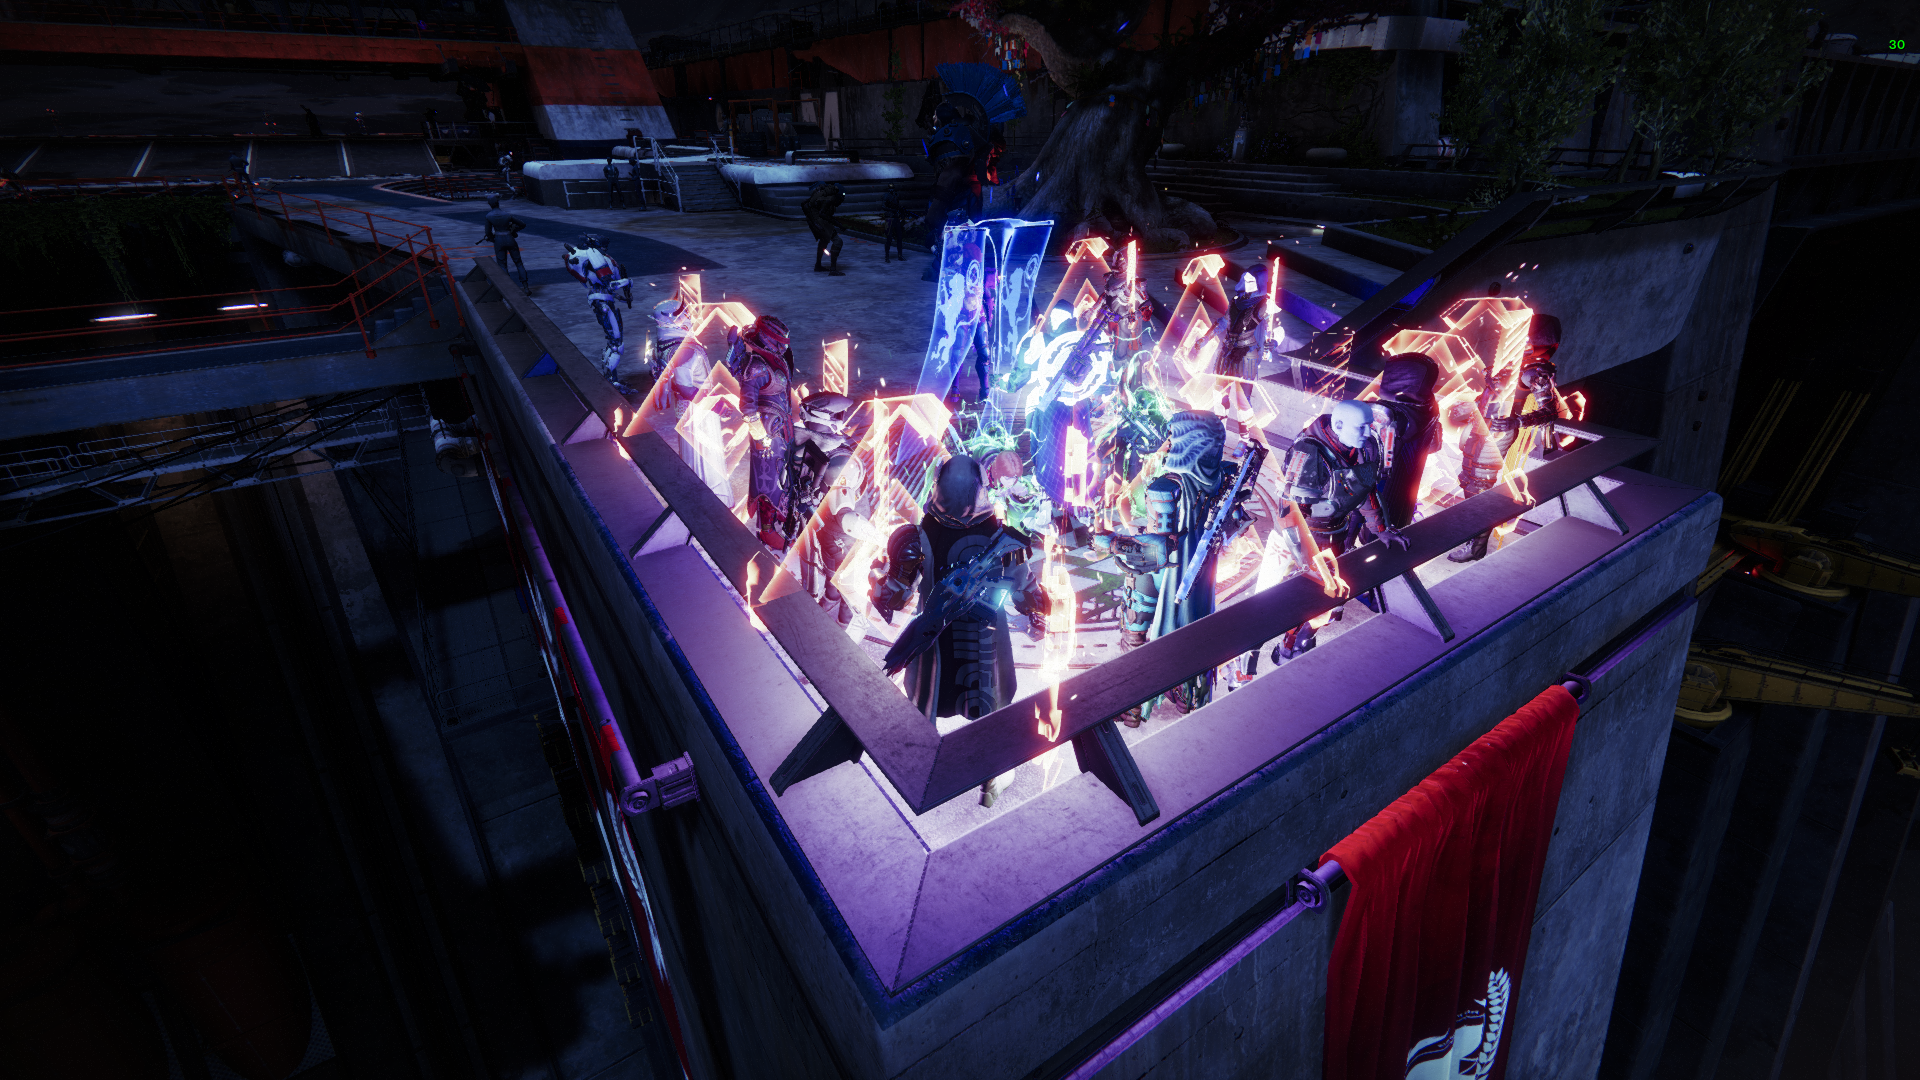 Destiny 2 Players Are Gathering In the Tower to Honor Lance Reddick